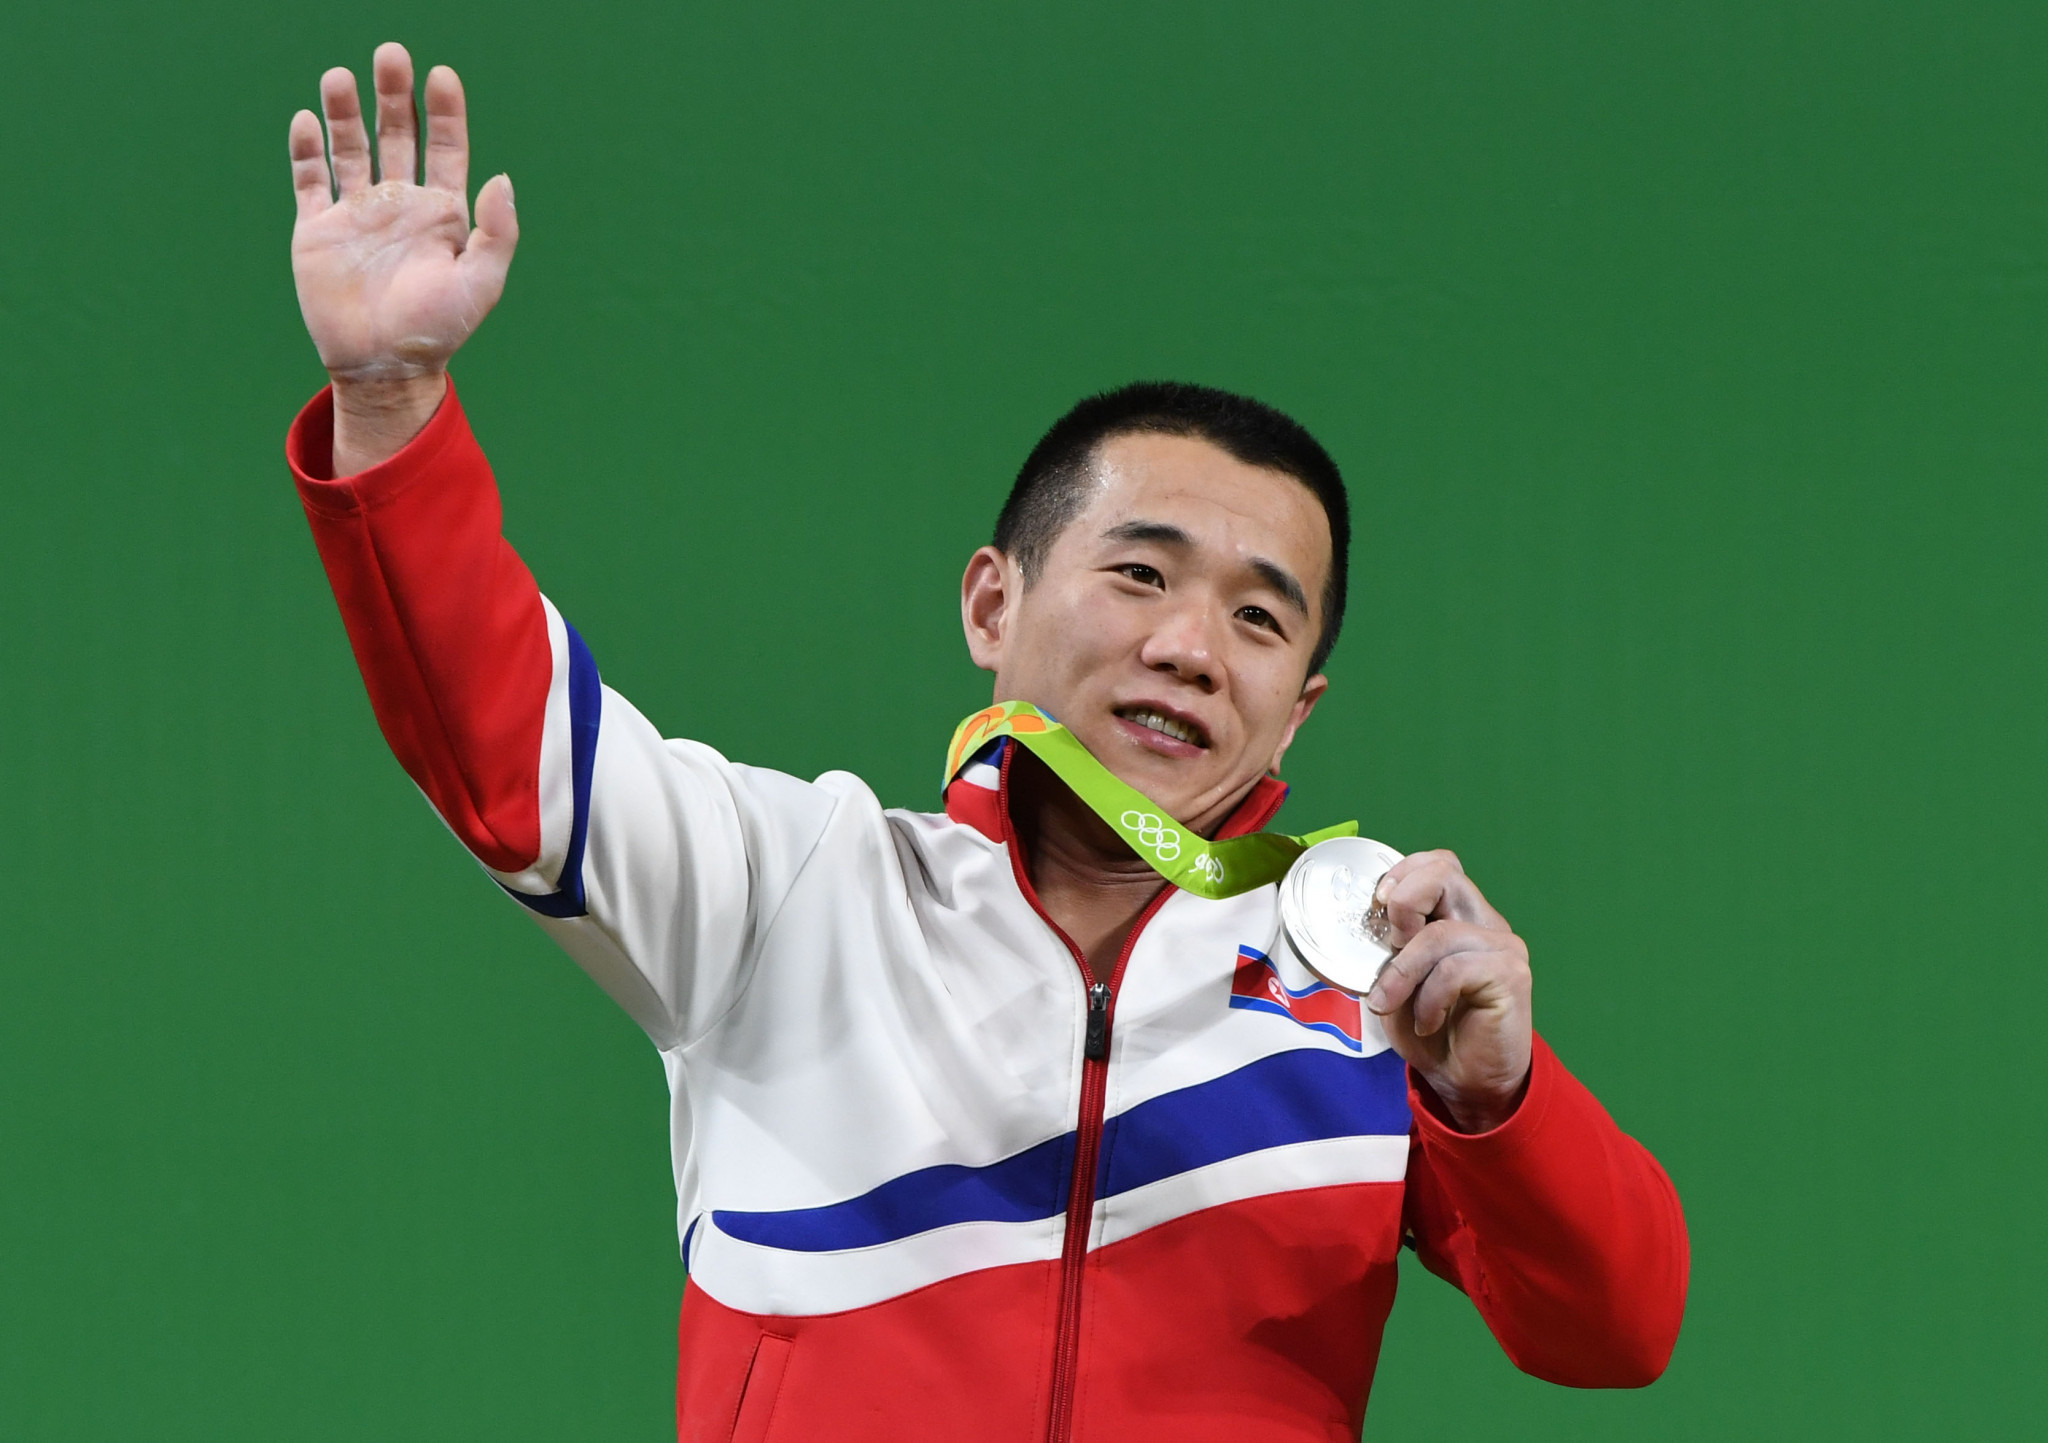 Weightlifters set to register North Korea's biggest sporting triumph - in the USA